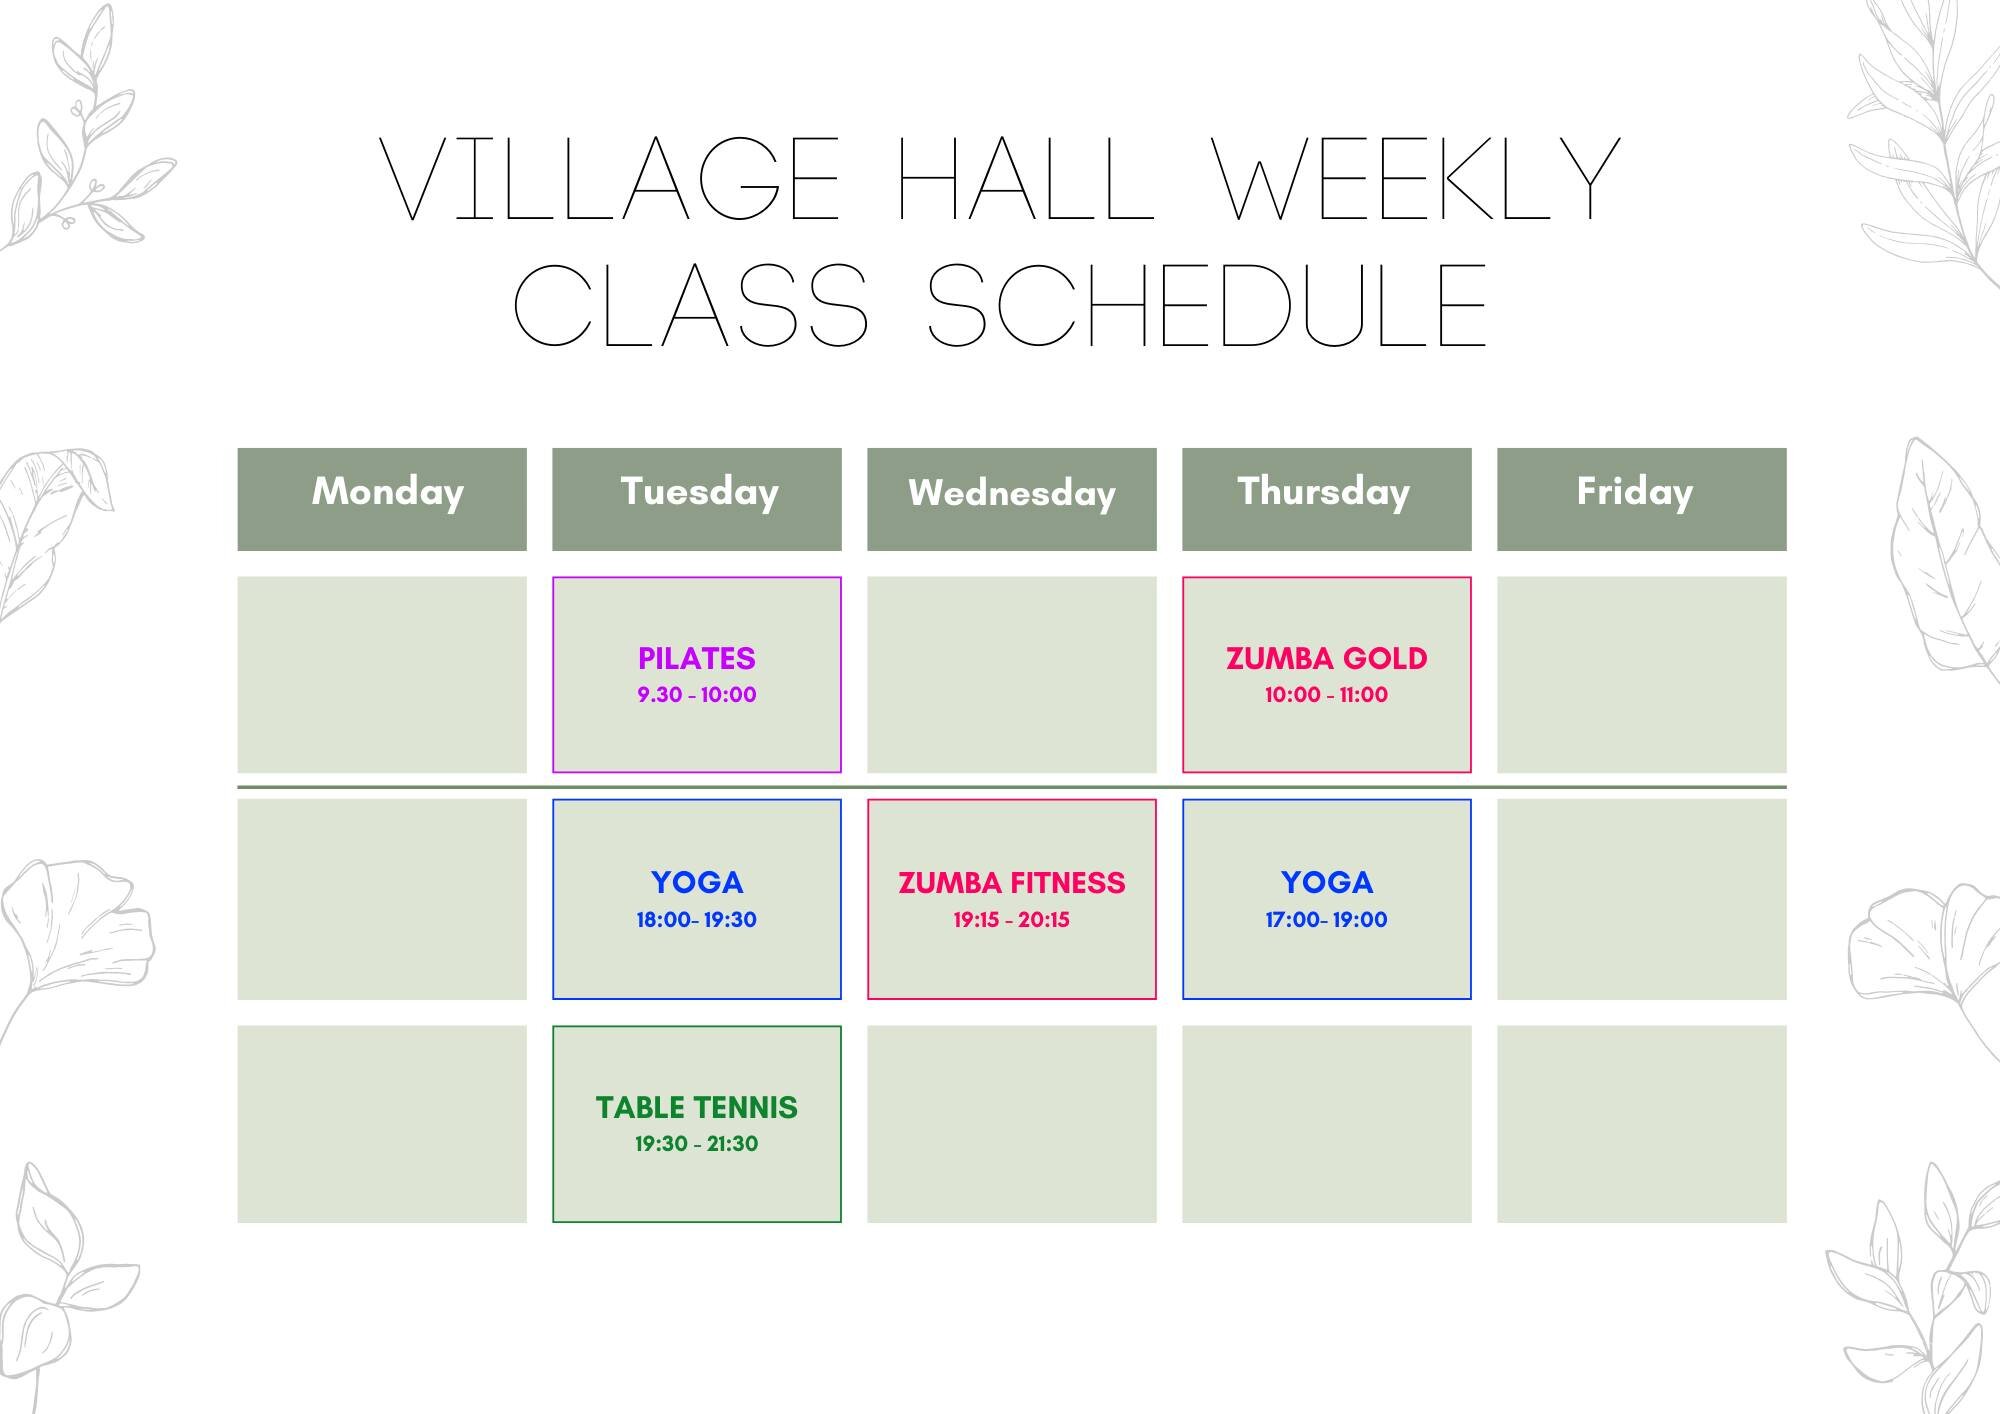 Classes on at the village hall next week (beginning 8th)